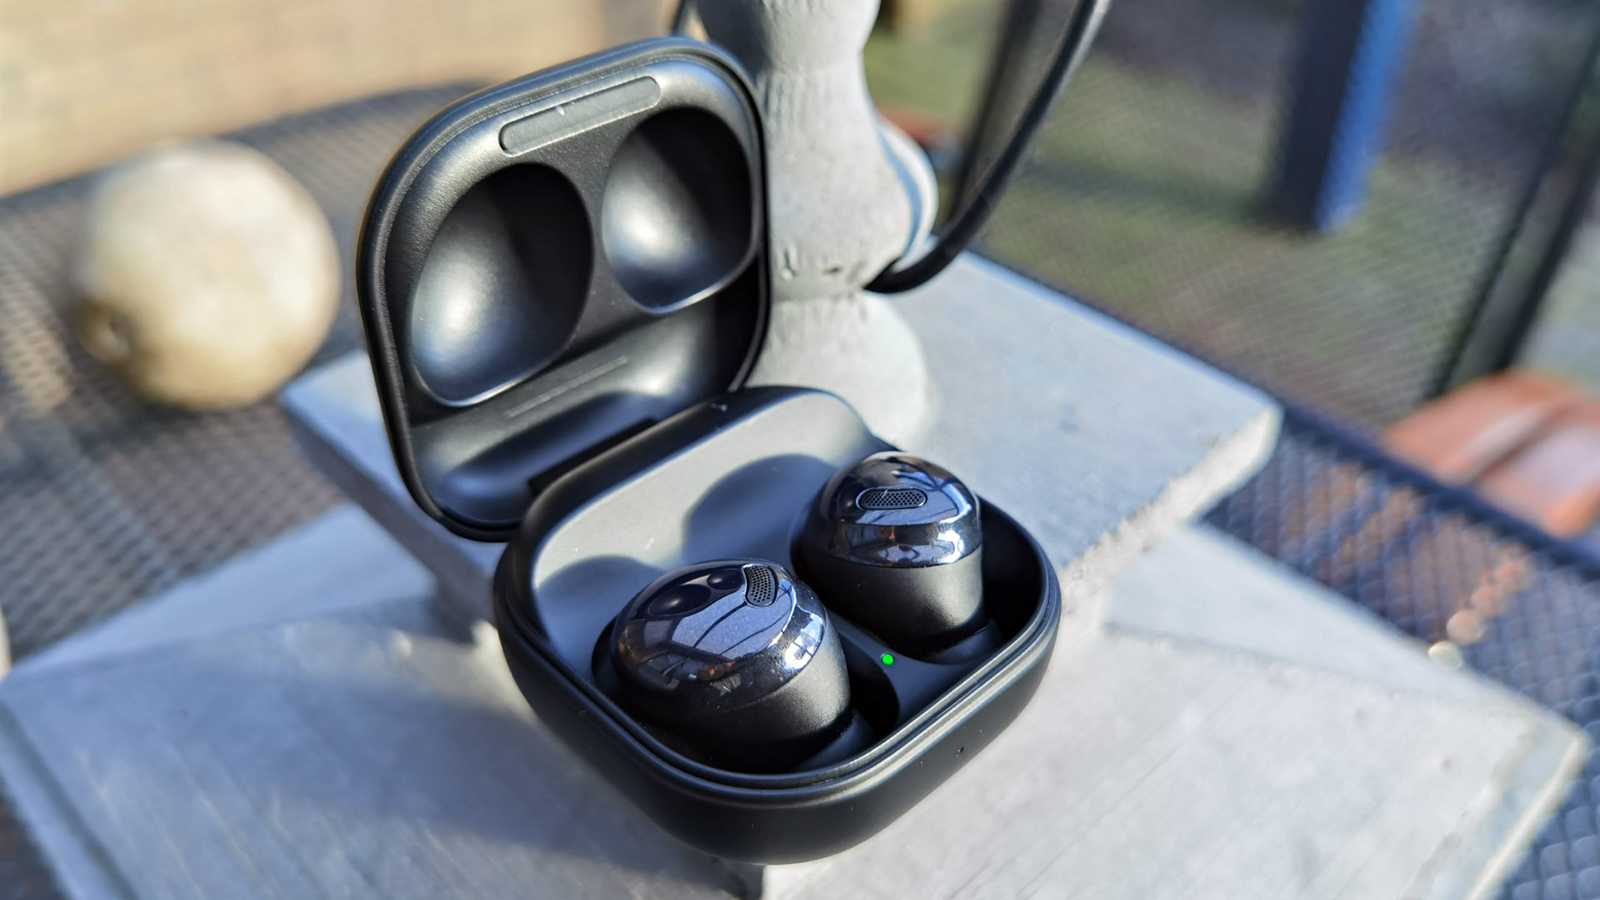 Most recent hole affirms the Samsung Galaxy Buds 2 will have ANC all things considered